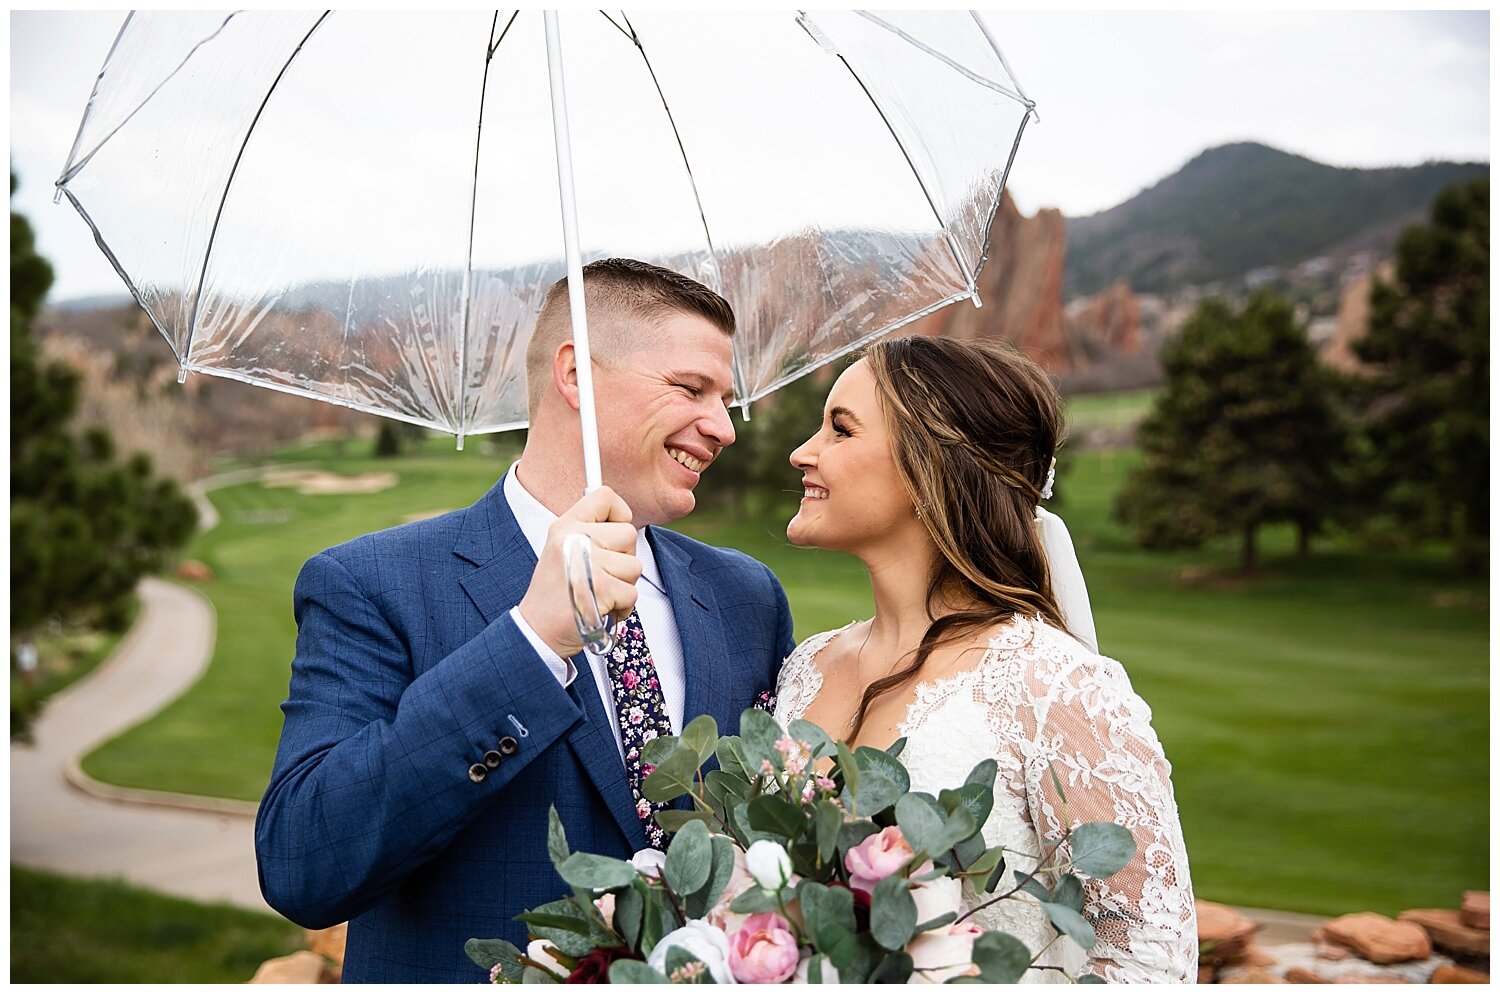 Molly and Nick's Wedding Day|Arrowhead Golf Course Elopement_0052.jpg